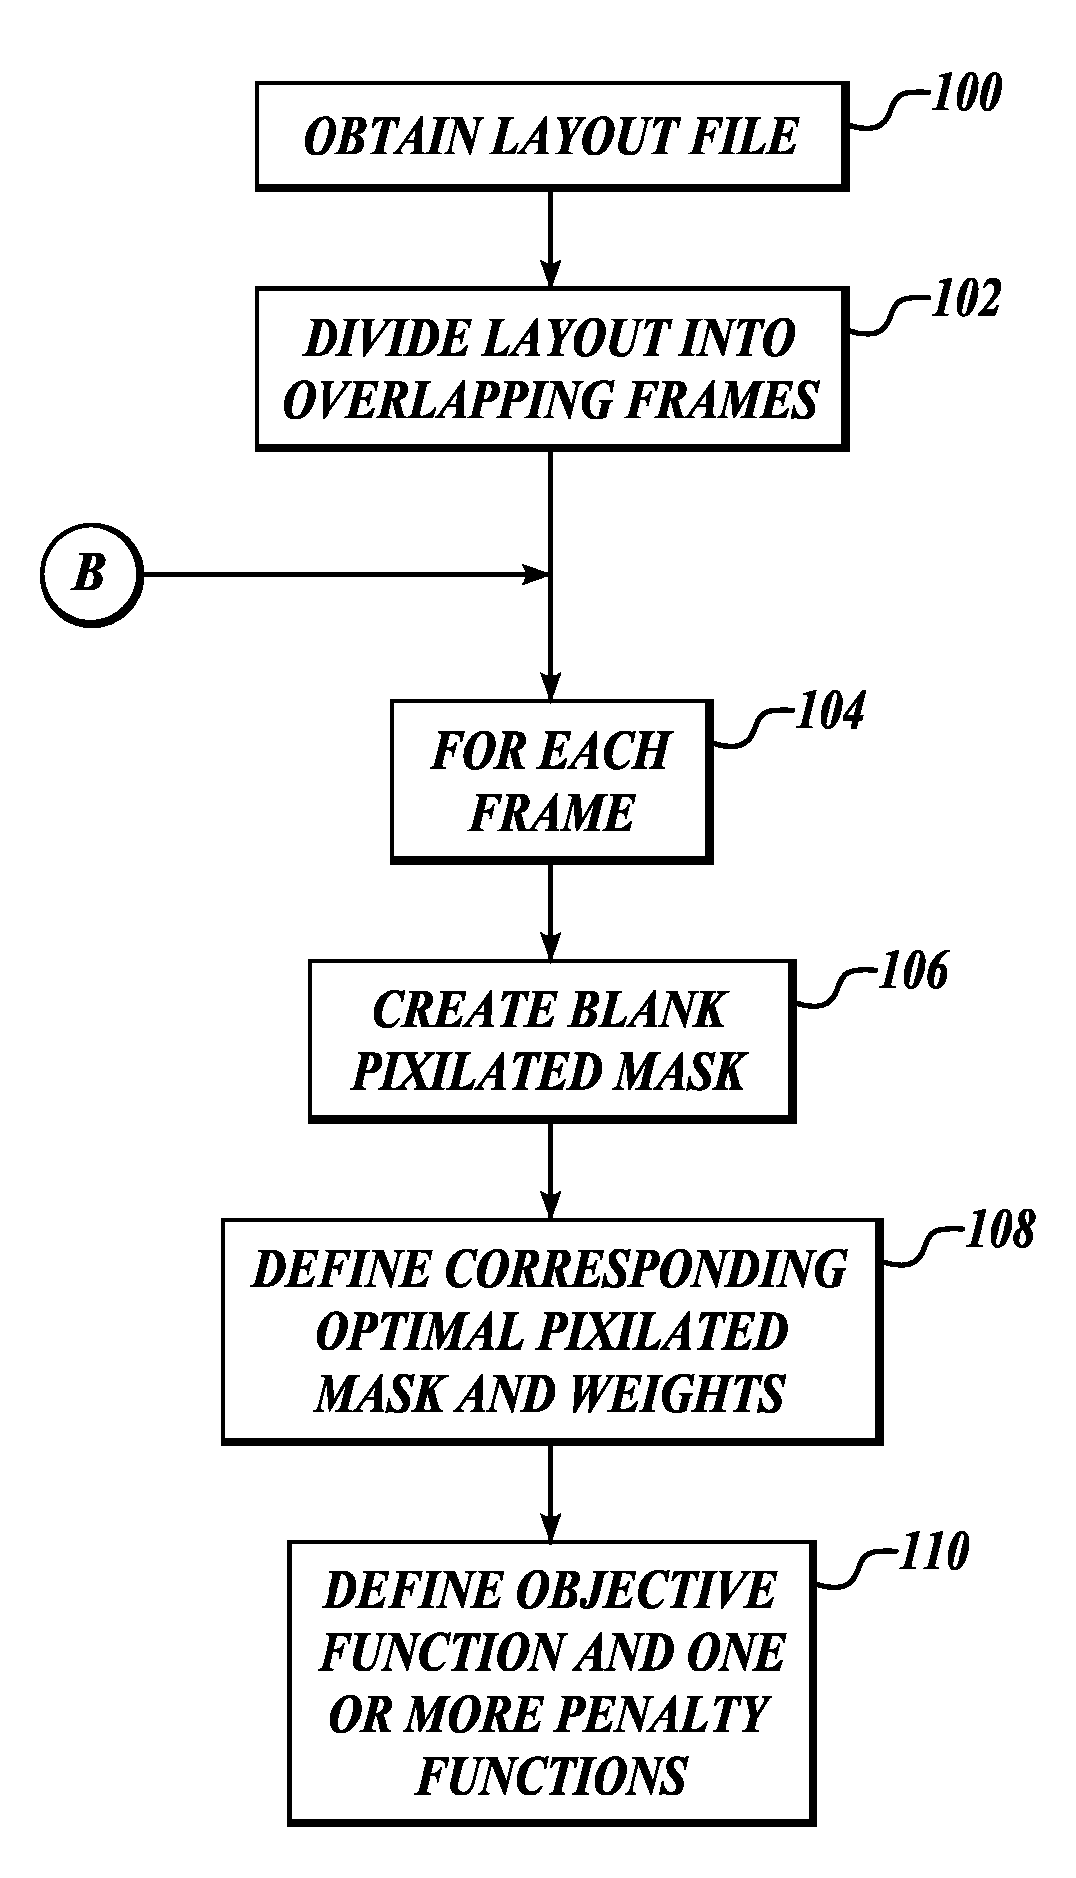 Calculation system for inverse masks